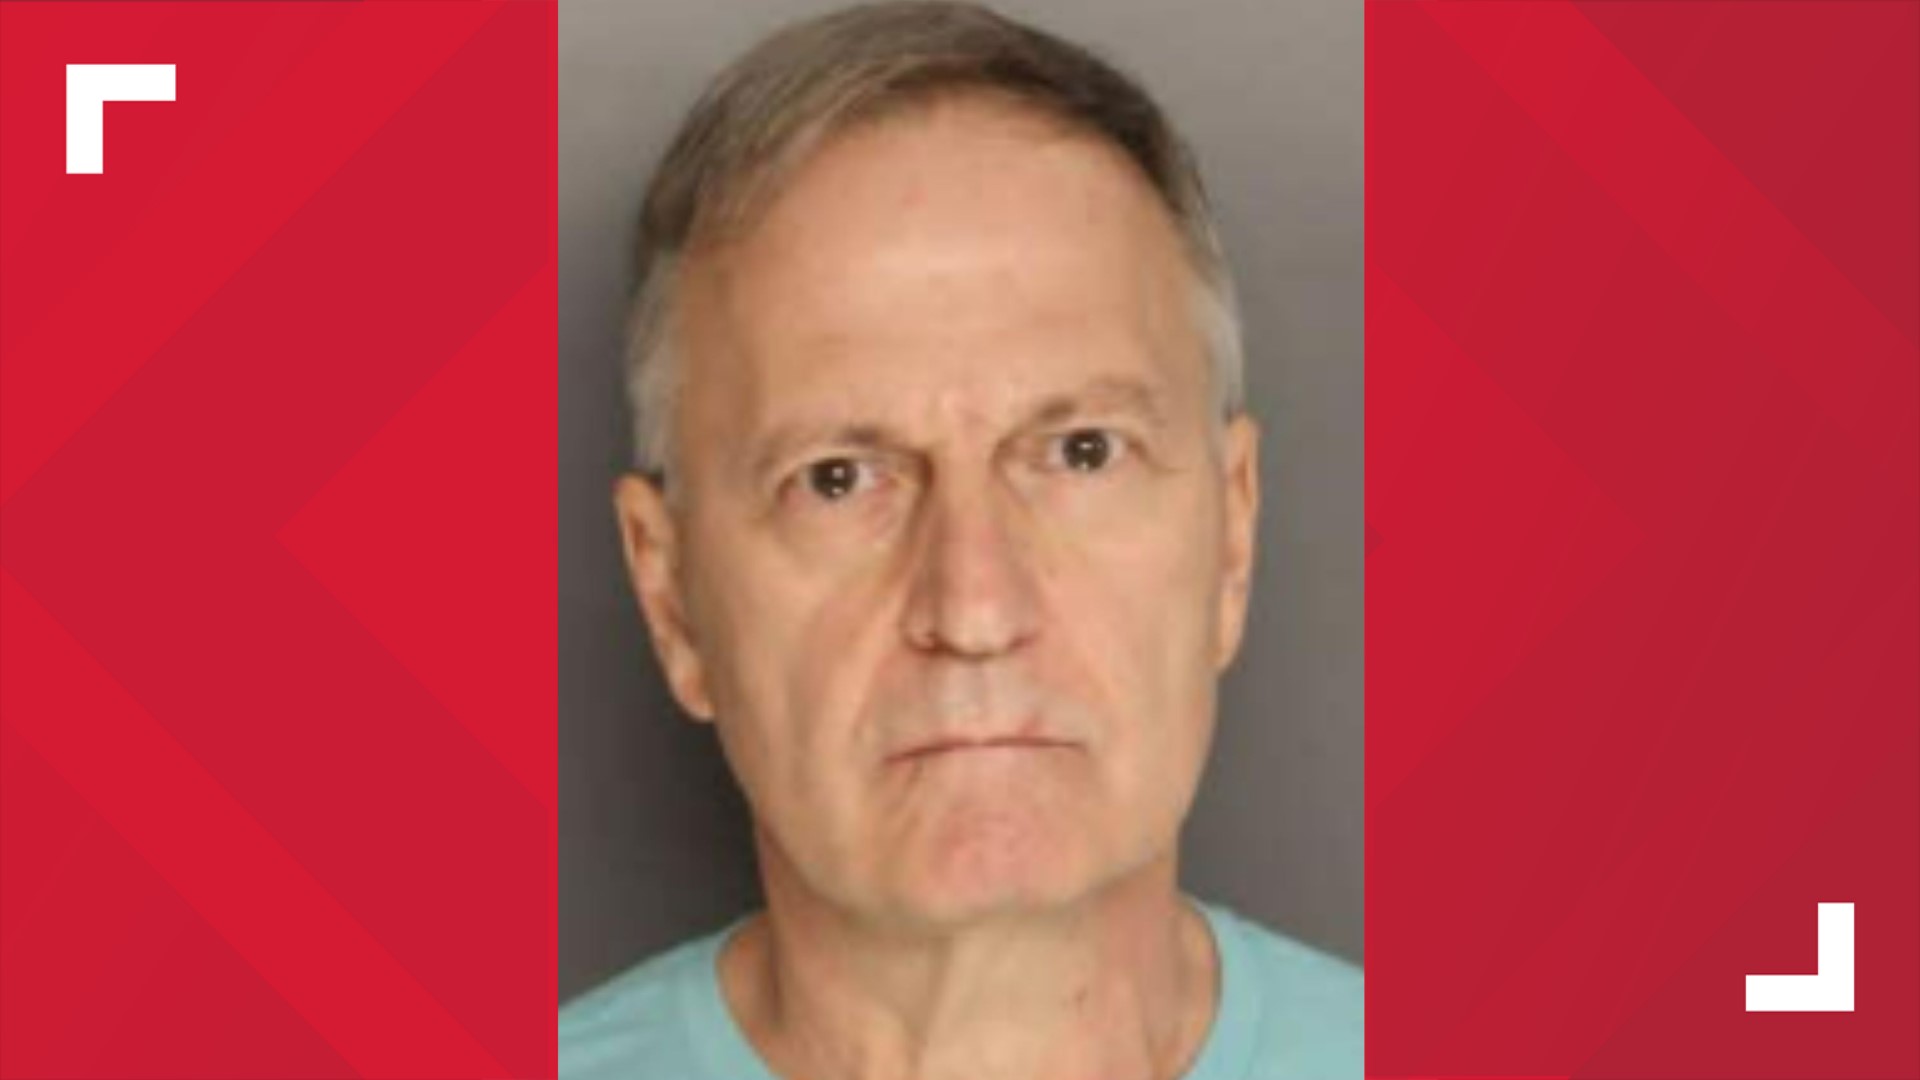 Off-duty SC officer, Anthony DeLustro, 64, shot and killed Michael O'Neal, 39, after an altercation in a Chick-Fil-A parking lot in March, according to SLED.